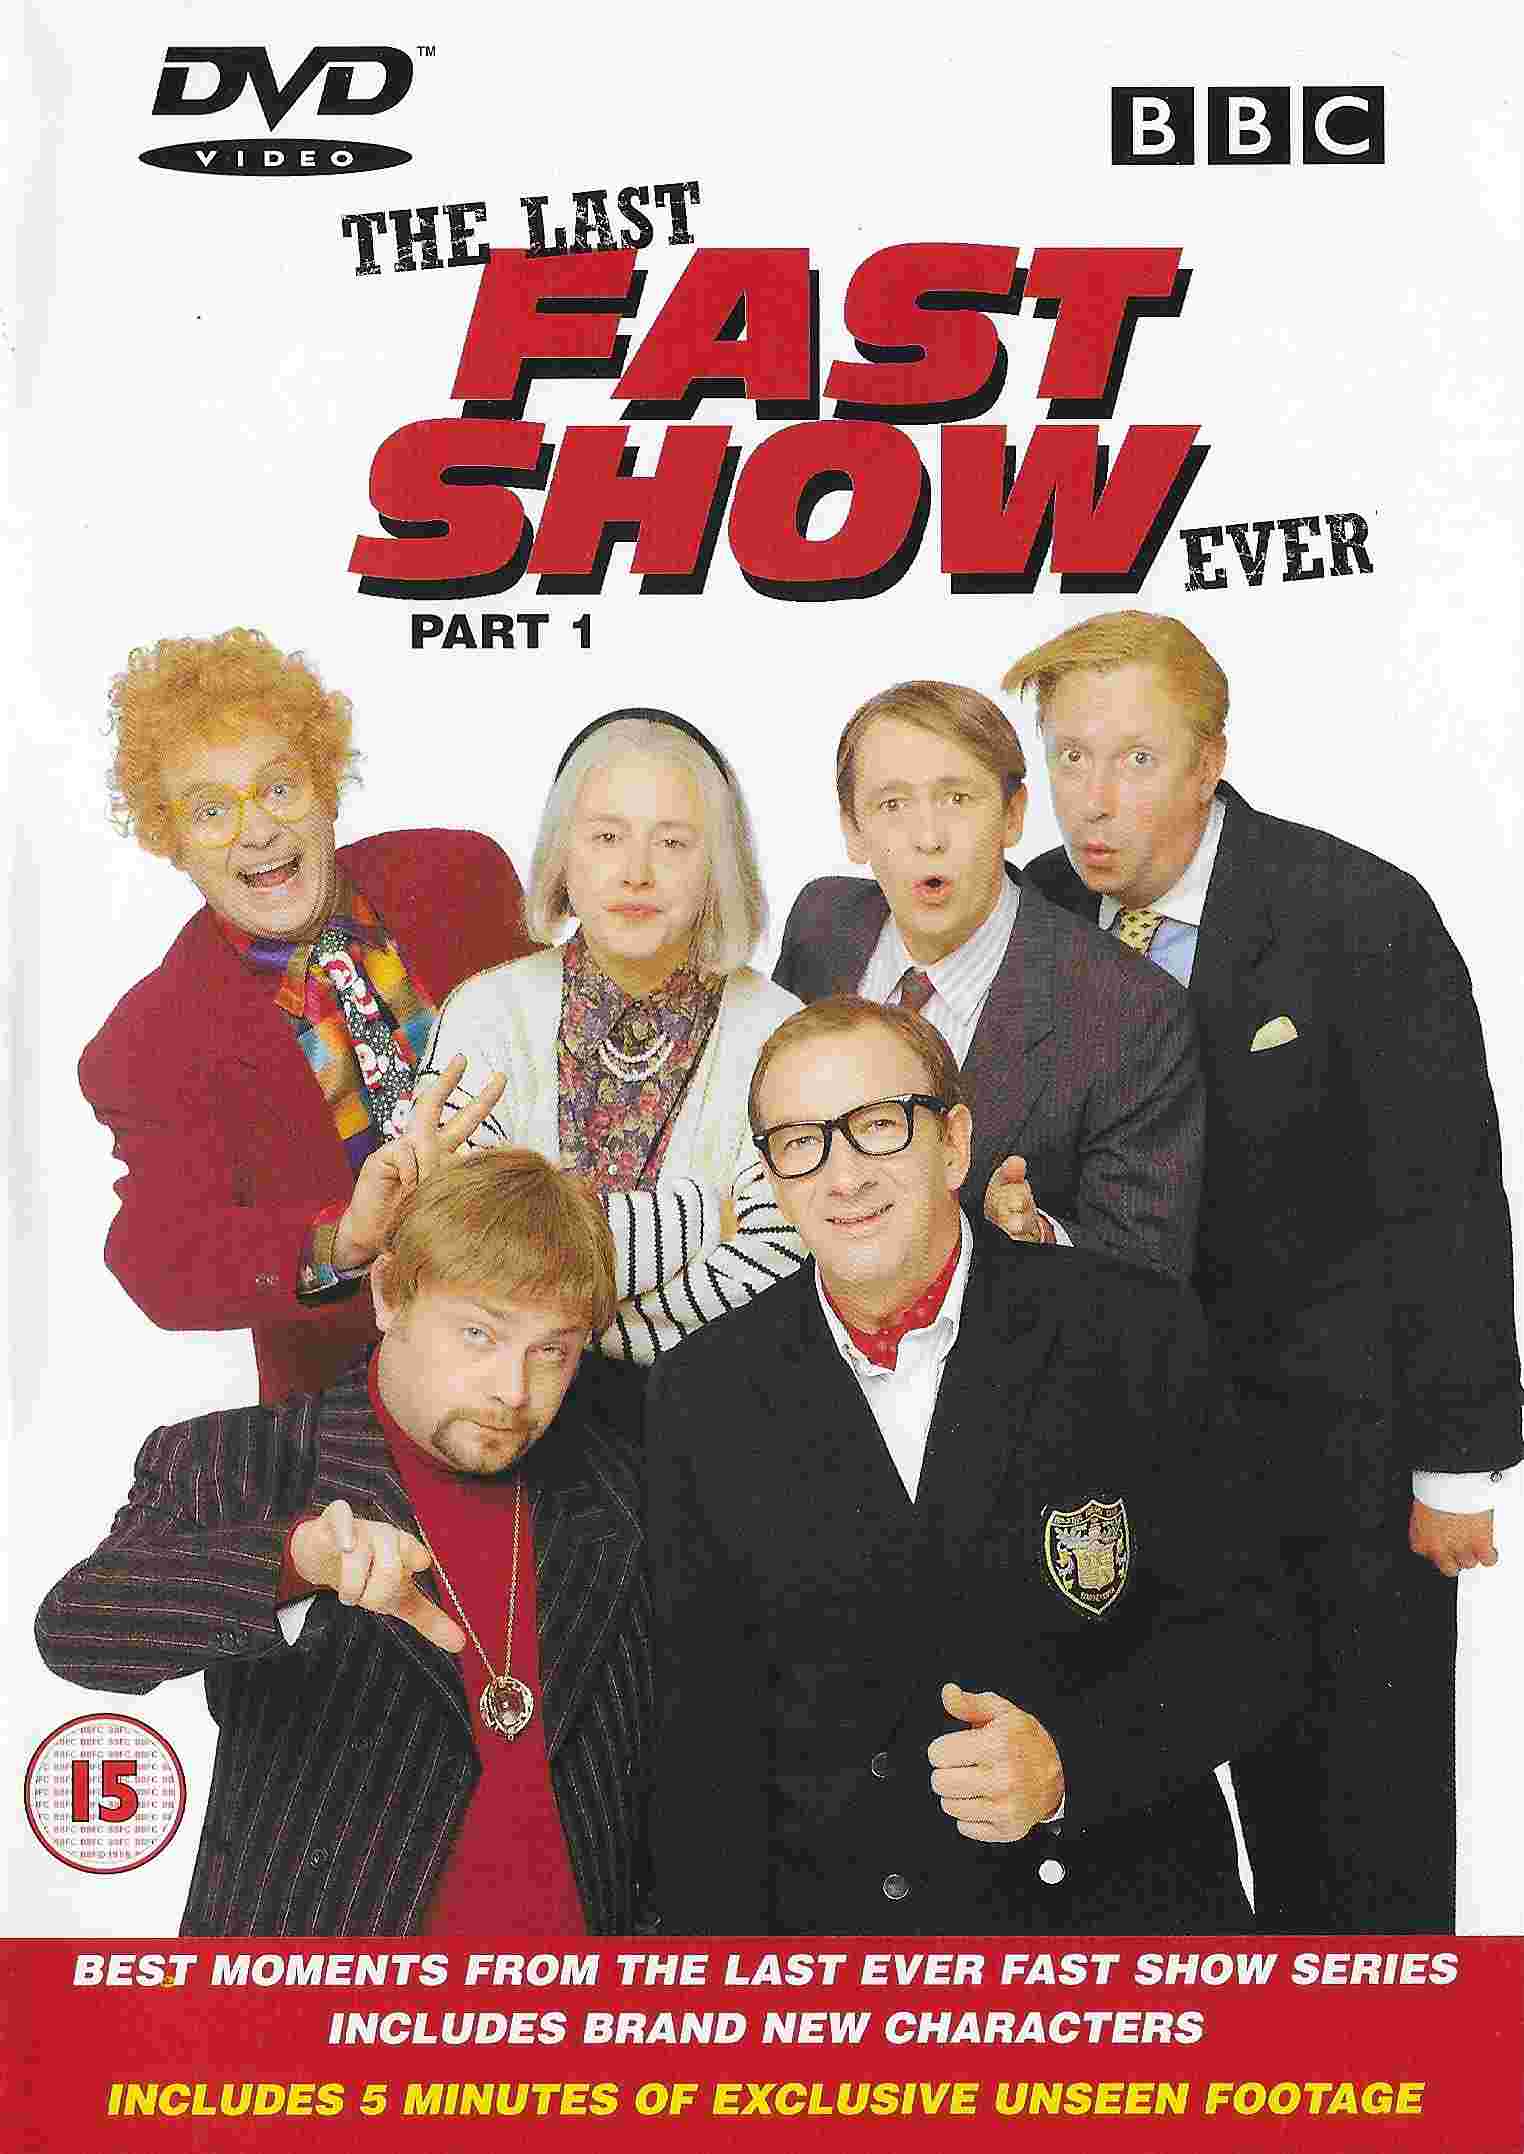 Picture of BBCDVD 1037 The last fast show ever - Part 1 by artist Paul Whitehouse / Charlie Higson from the BBC records and Tapes library